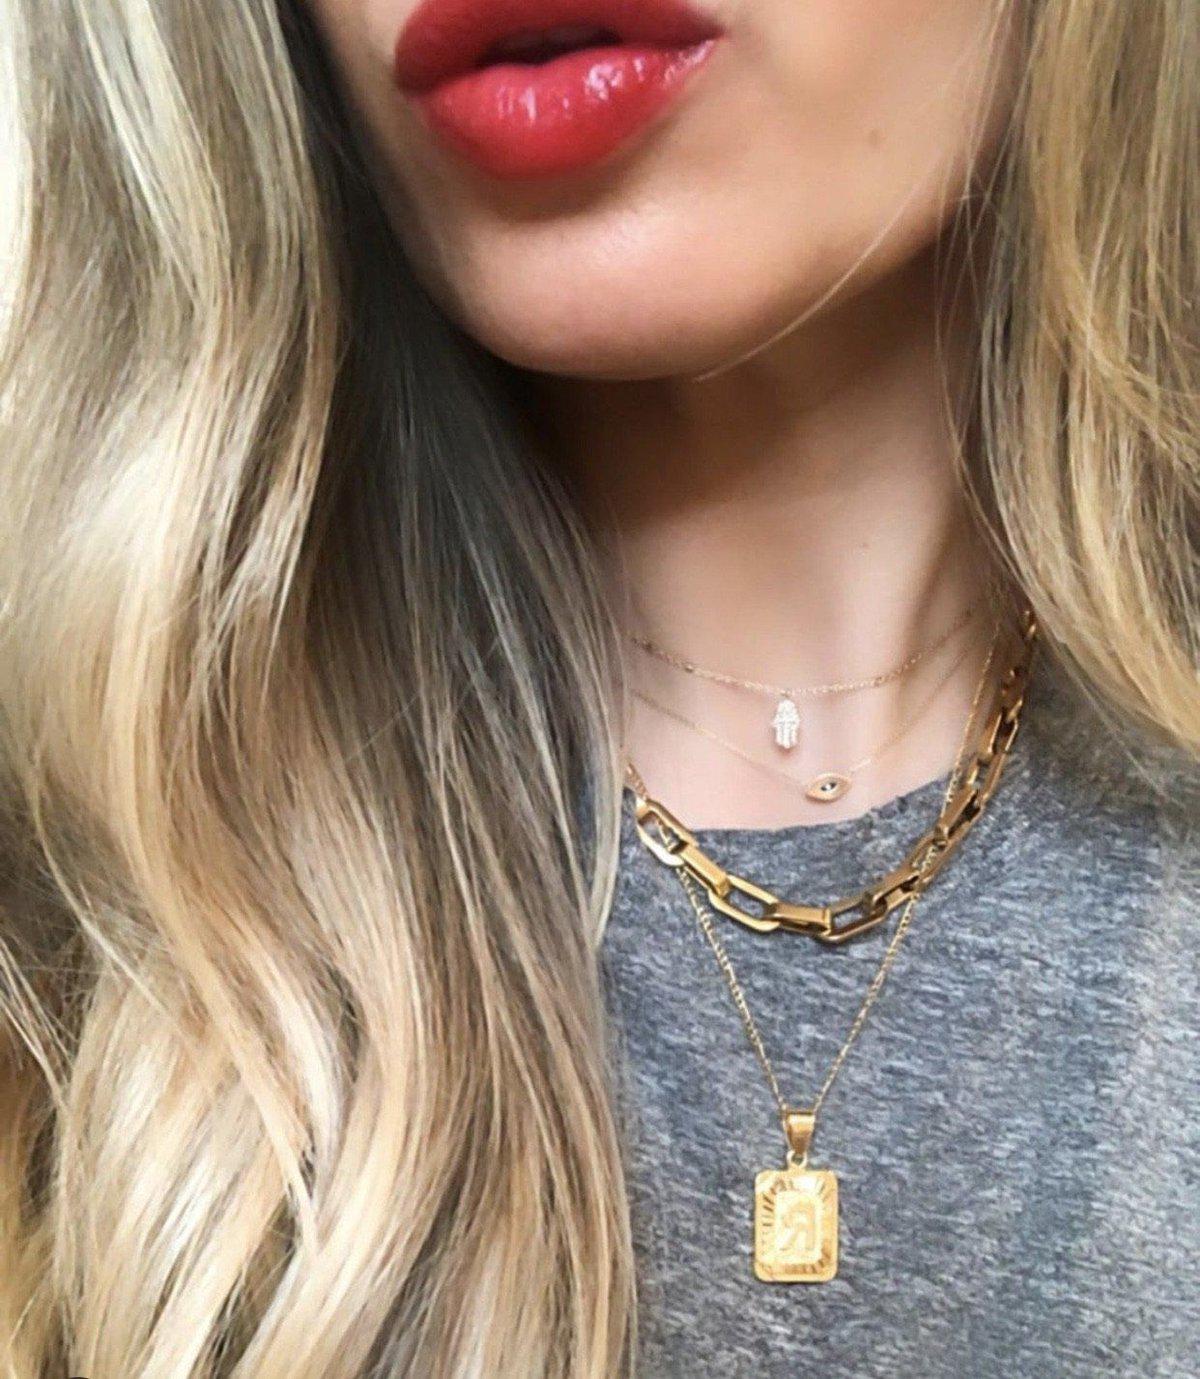 Candybar Necklace | Gold Necklace | High Quality Jewelry That Gives Back | Wear Bracha Jewelry